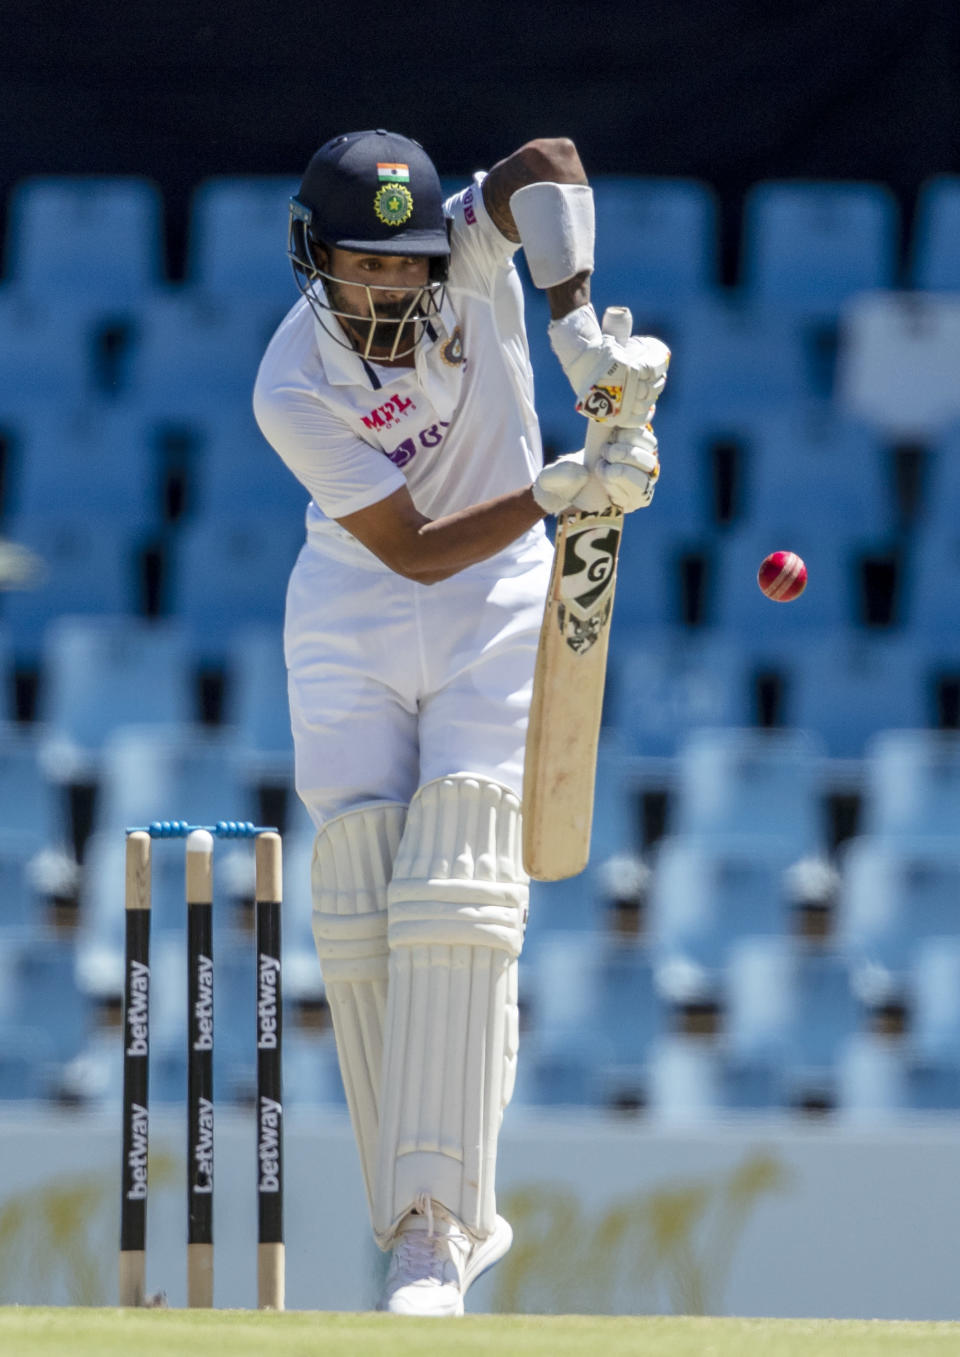 India's batsman KL Rahul plays side shot during the fourth day of the Test Cricket match between South Africa and India at Centurion Park in Pretoria, South Africa, Wednesday, Dec. 29, 2021. (AP Photo/Themba Hadebe)